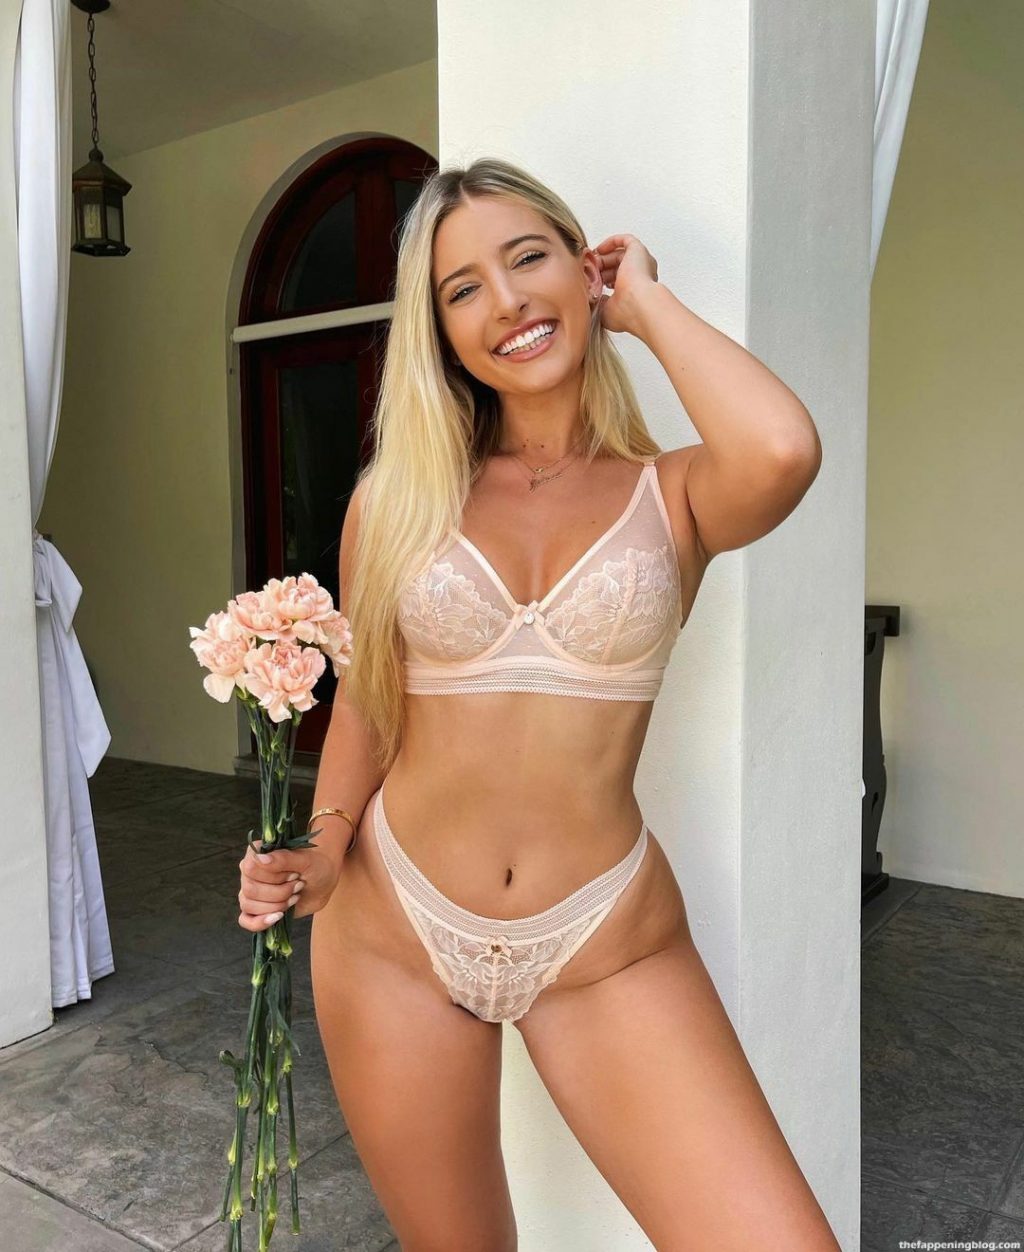 Jilissa Ann Zoltko Looks Hot in a Bra and Panties with Flowers (8 Photos)